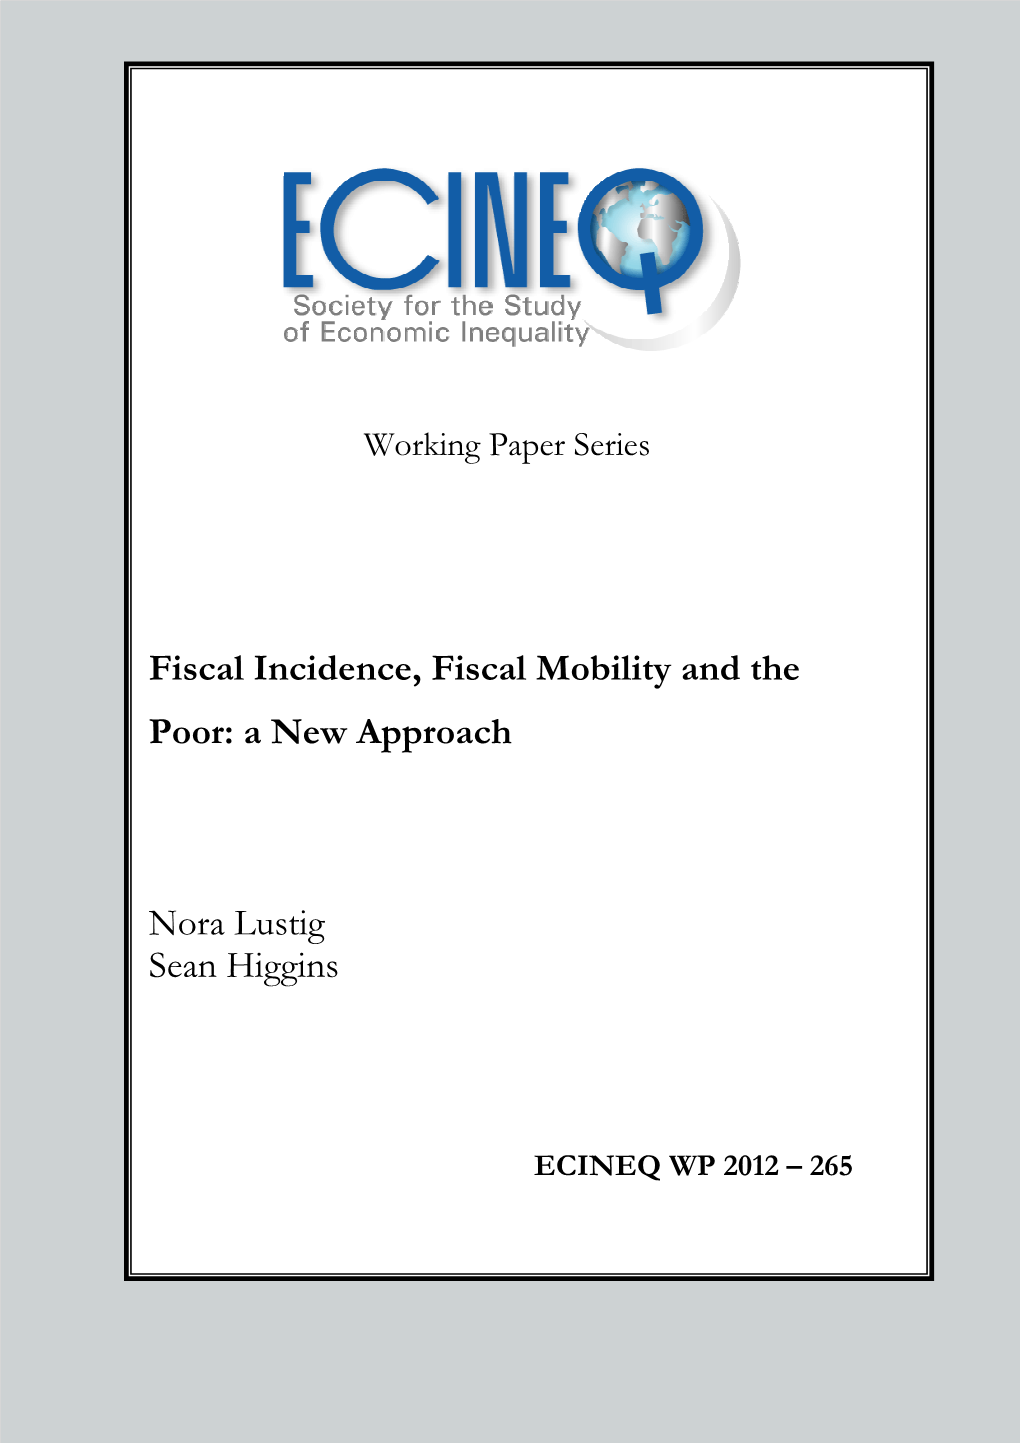 Fiscal Incidence, Fiscal Mobility and the Poor: a New Approach